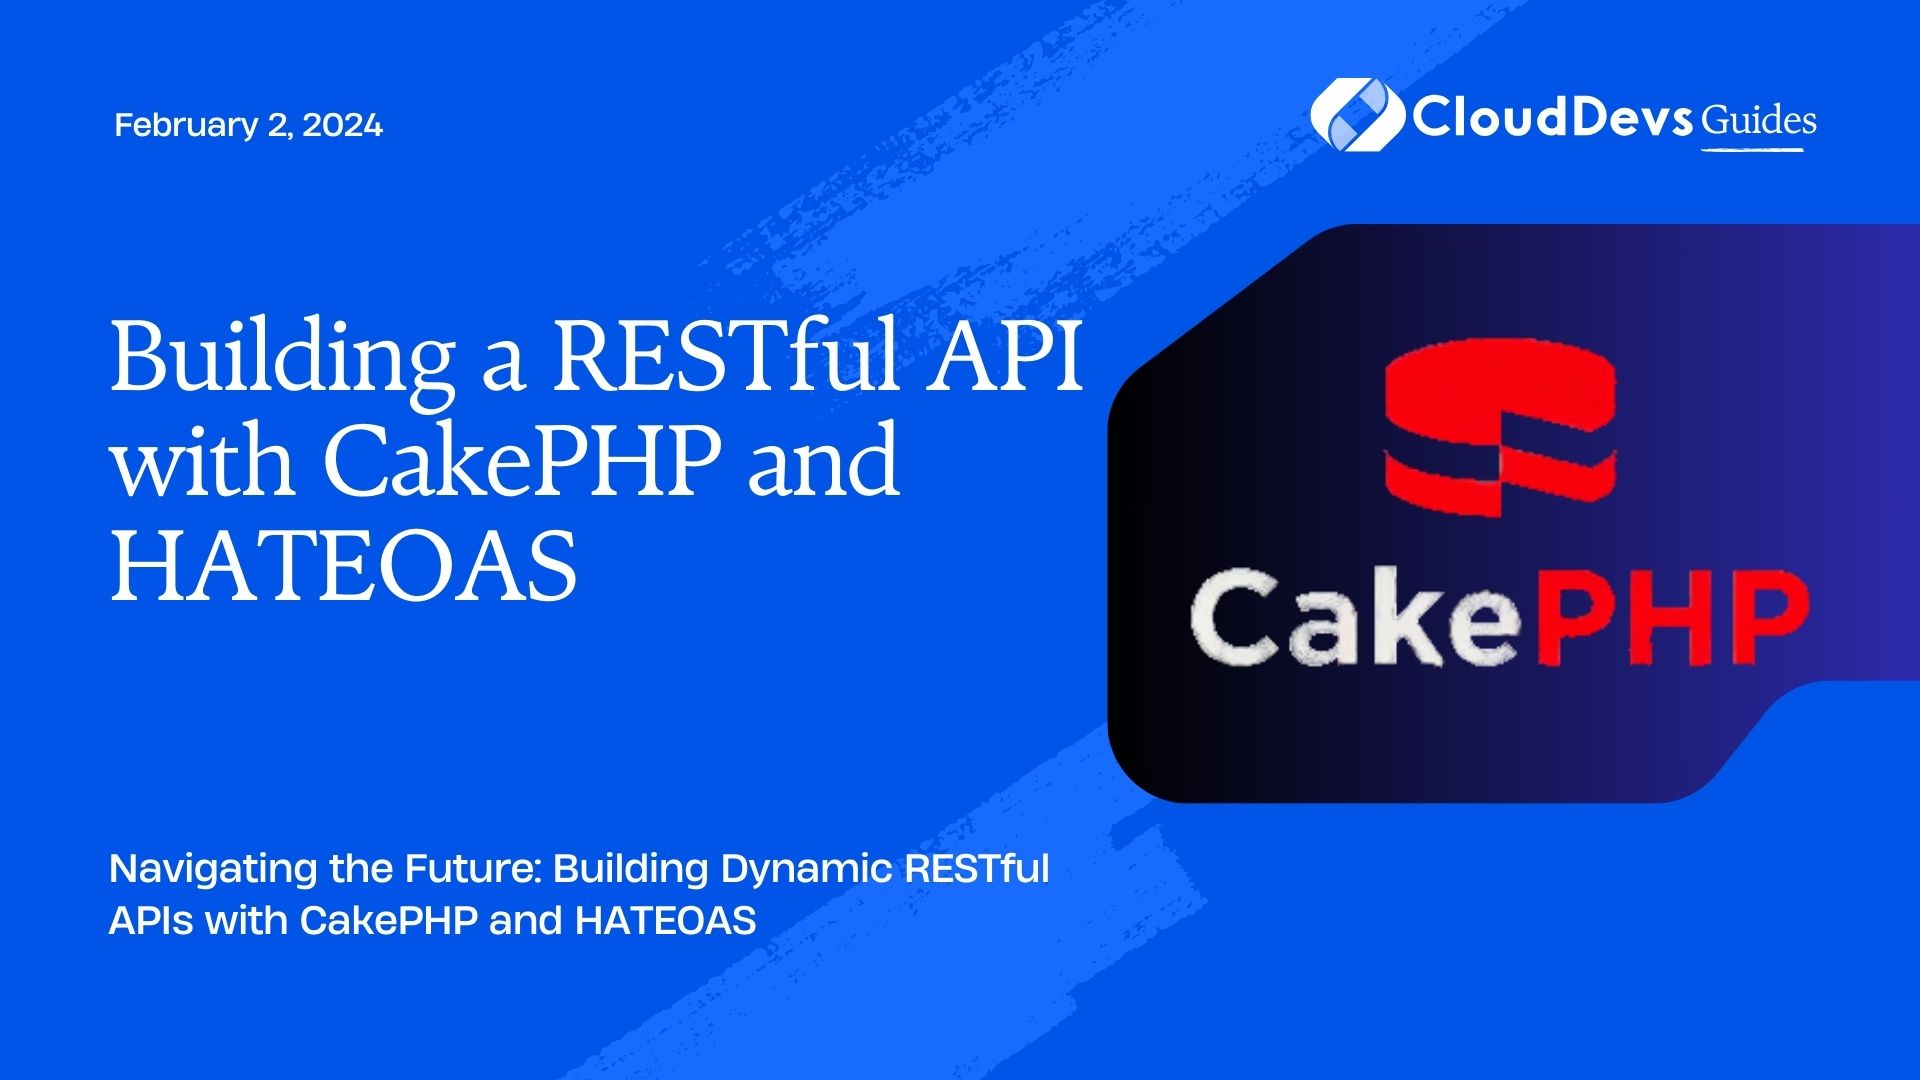 Building a RESTful API with CakePHP and HATEOAS